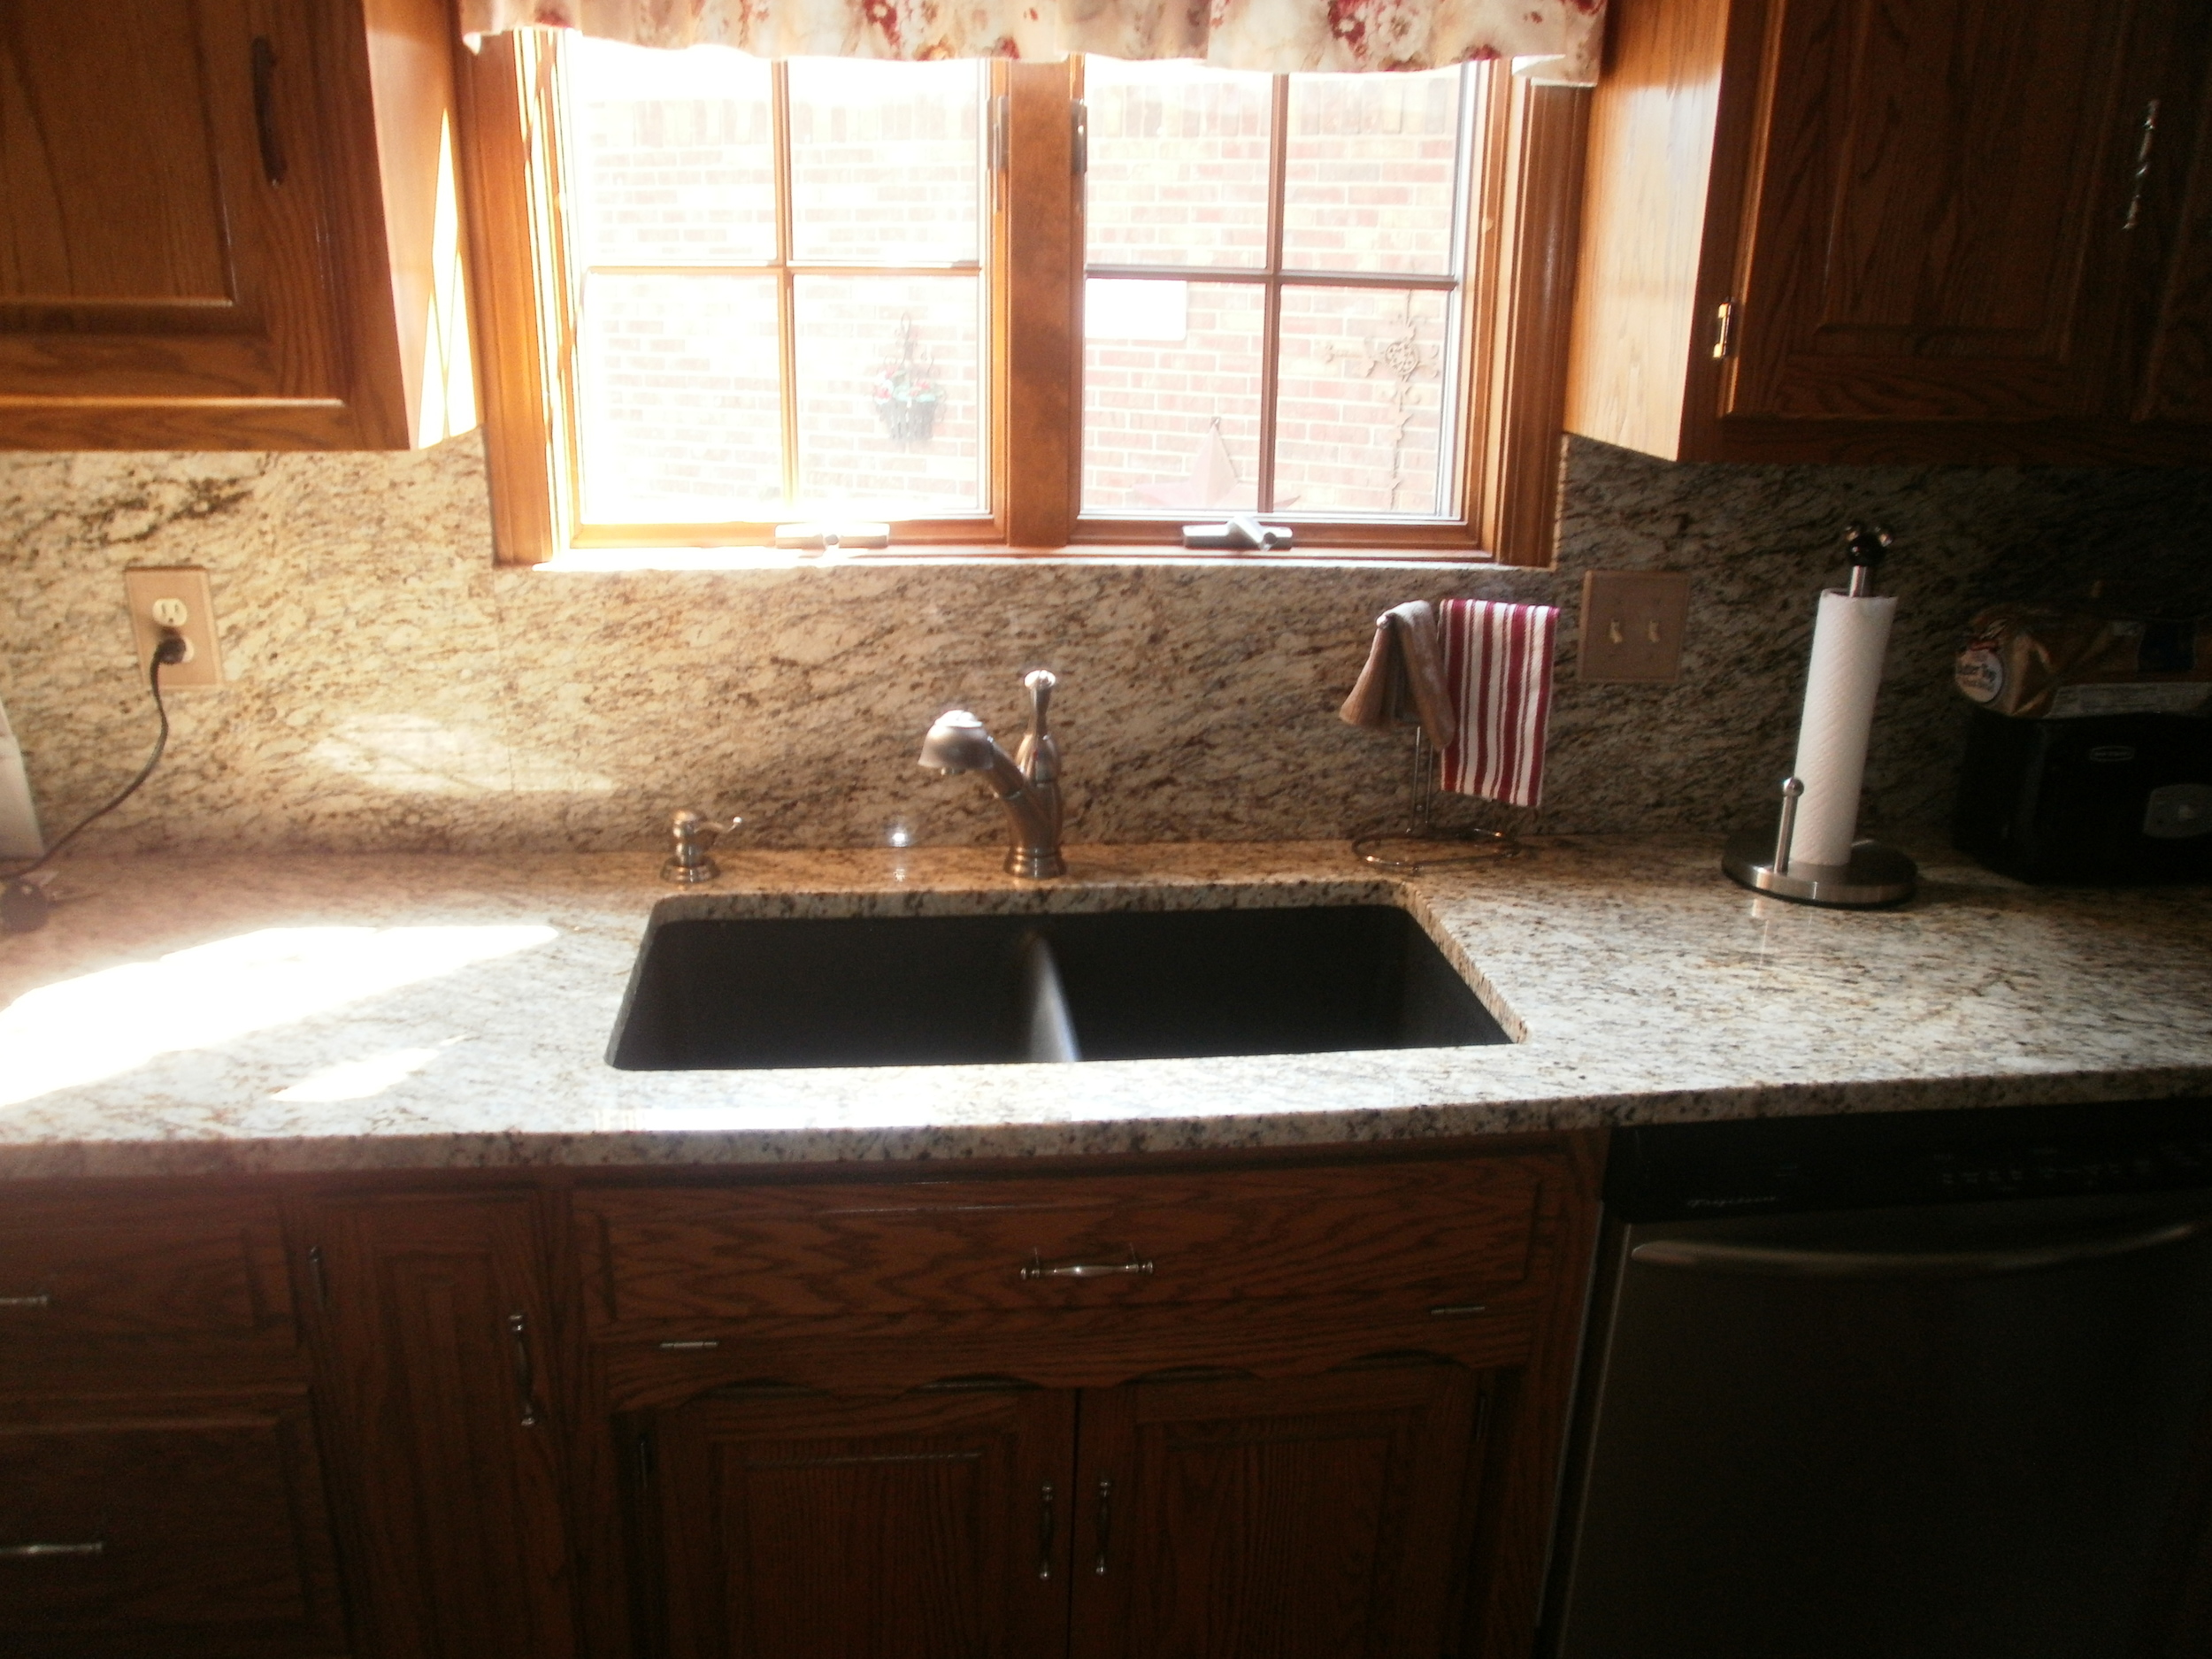 Miles-Kitchen-remodel-indy-indiana.JPG